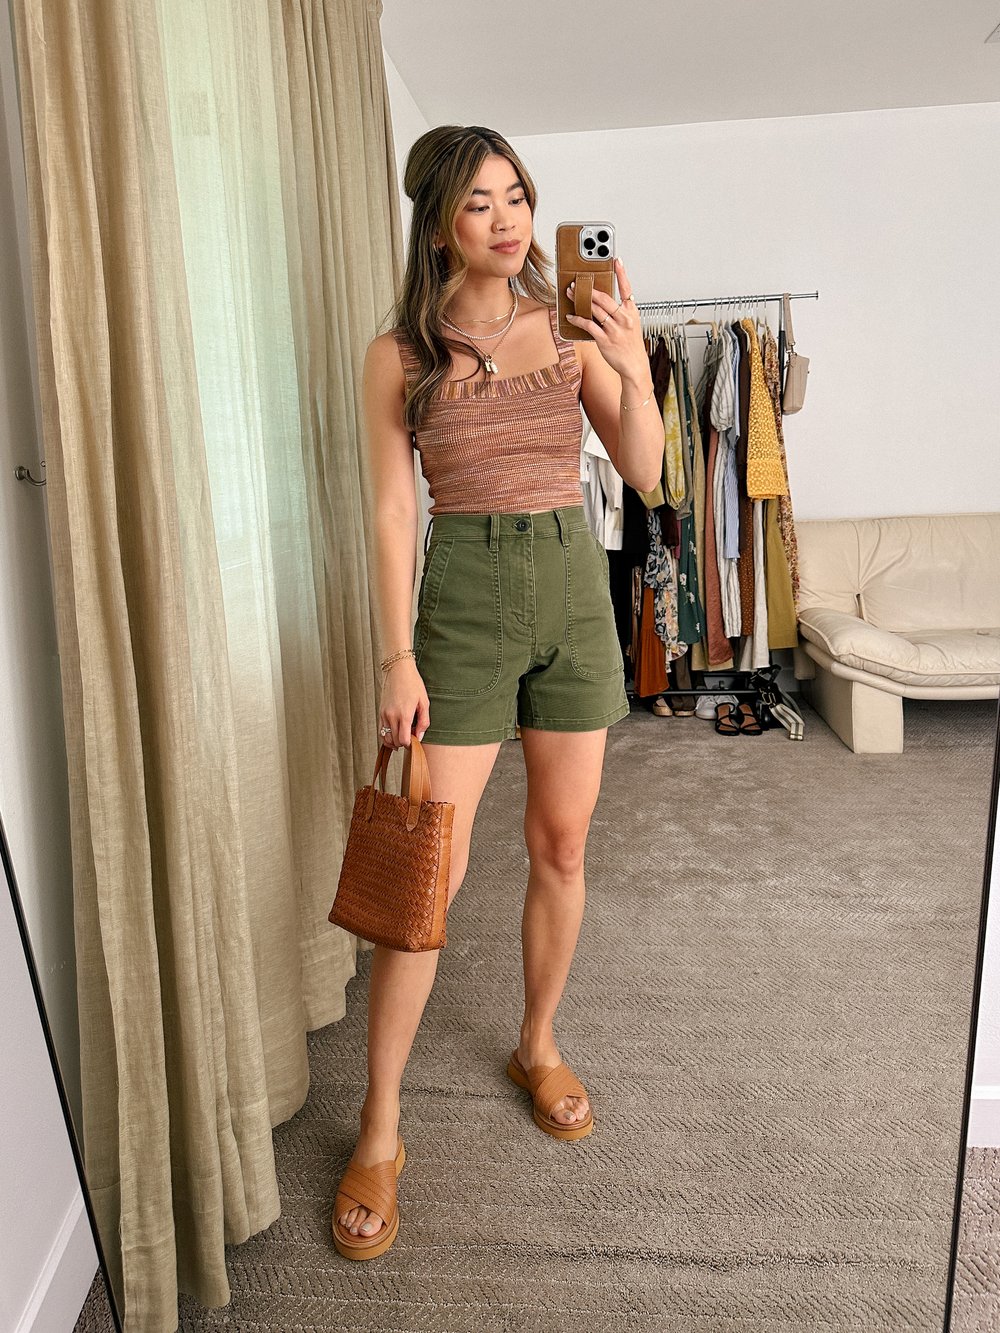 23 Best Brown shorts outfit ideas  short outfits, brown shorts outfit, brown  shorts